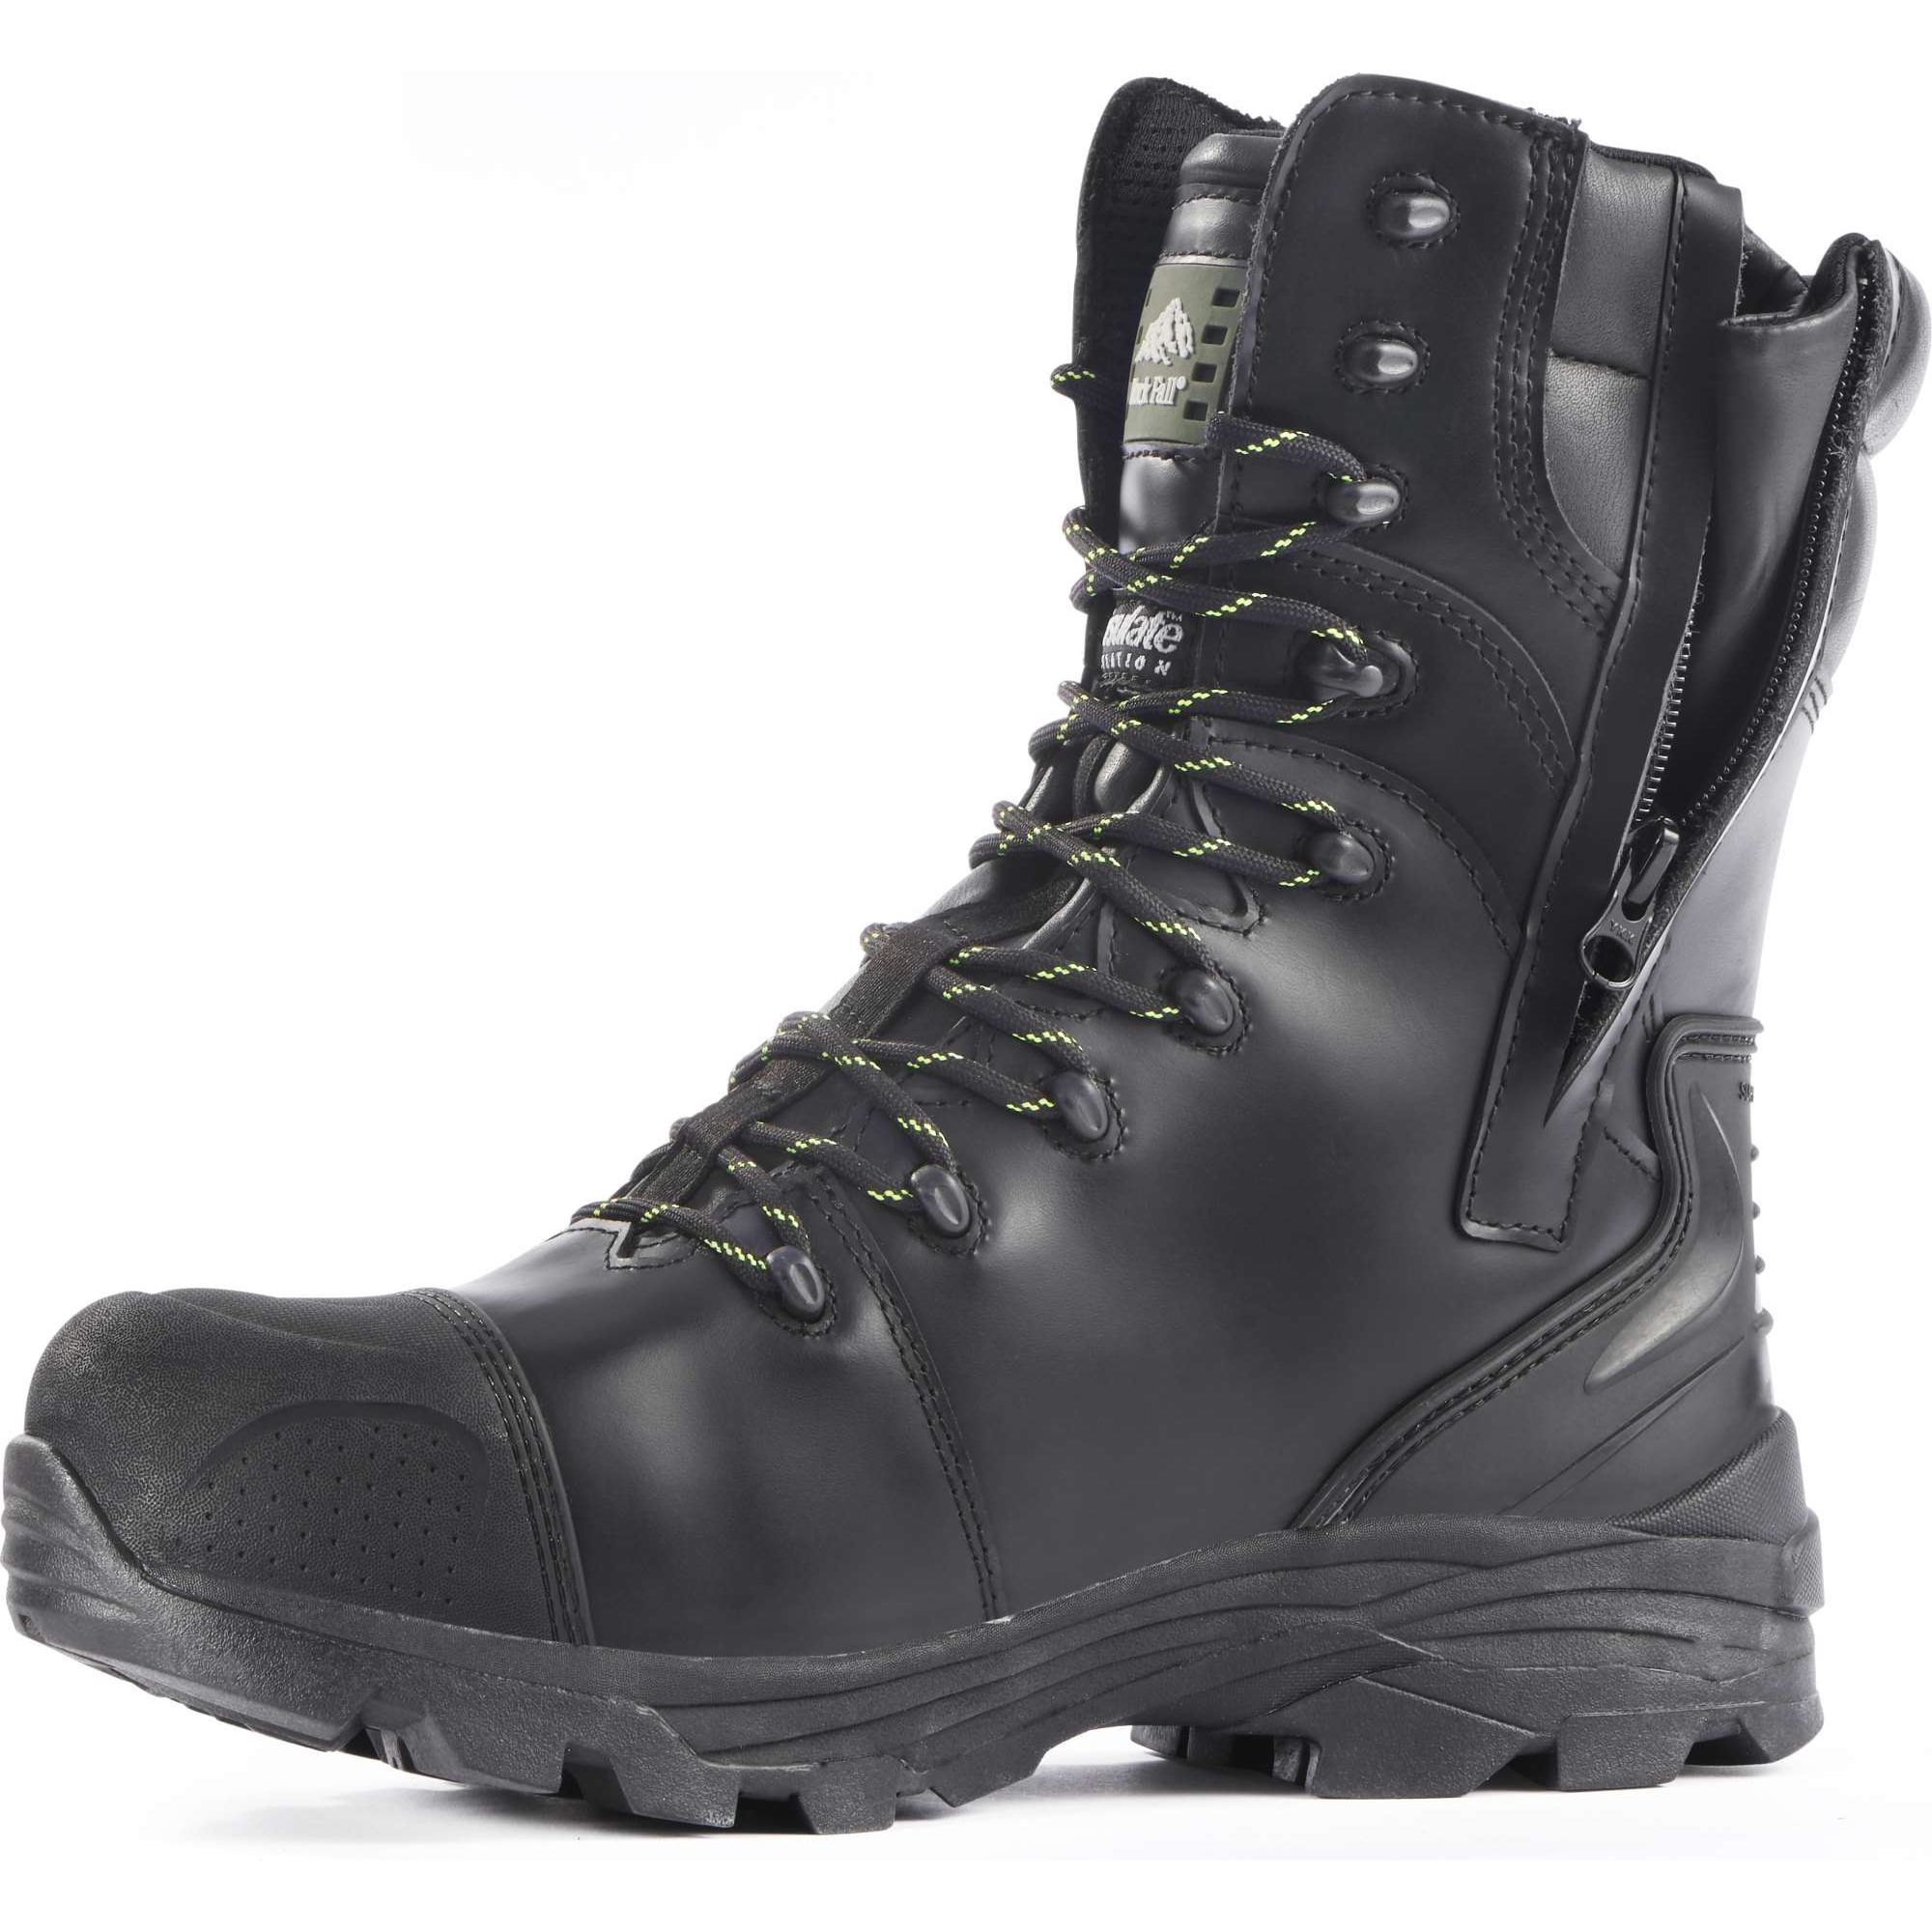 rockfall safety shoes